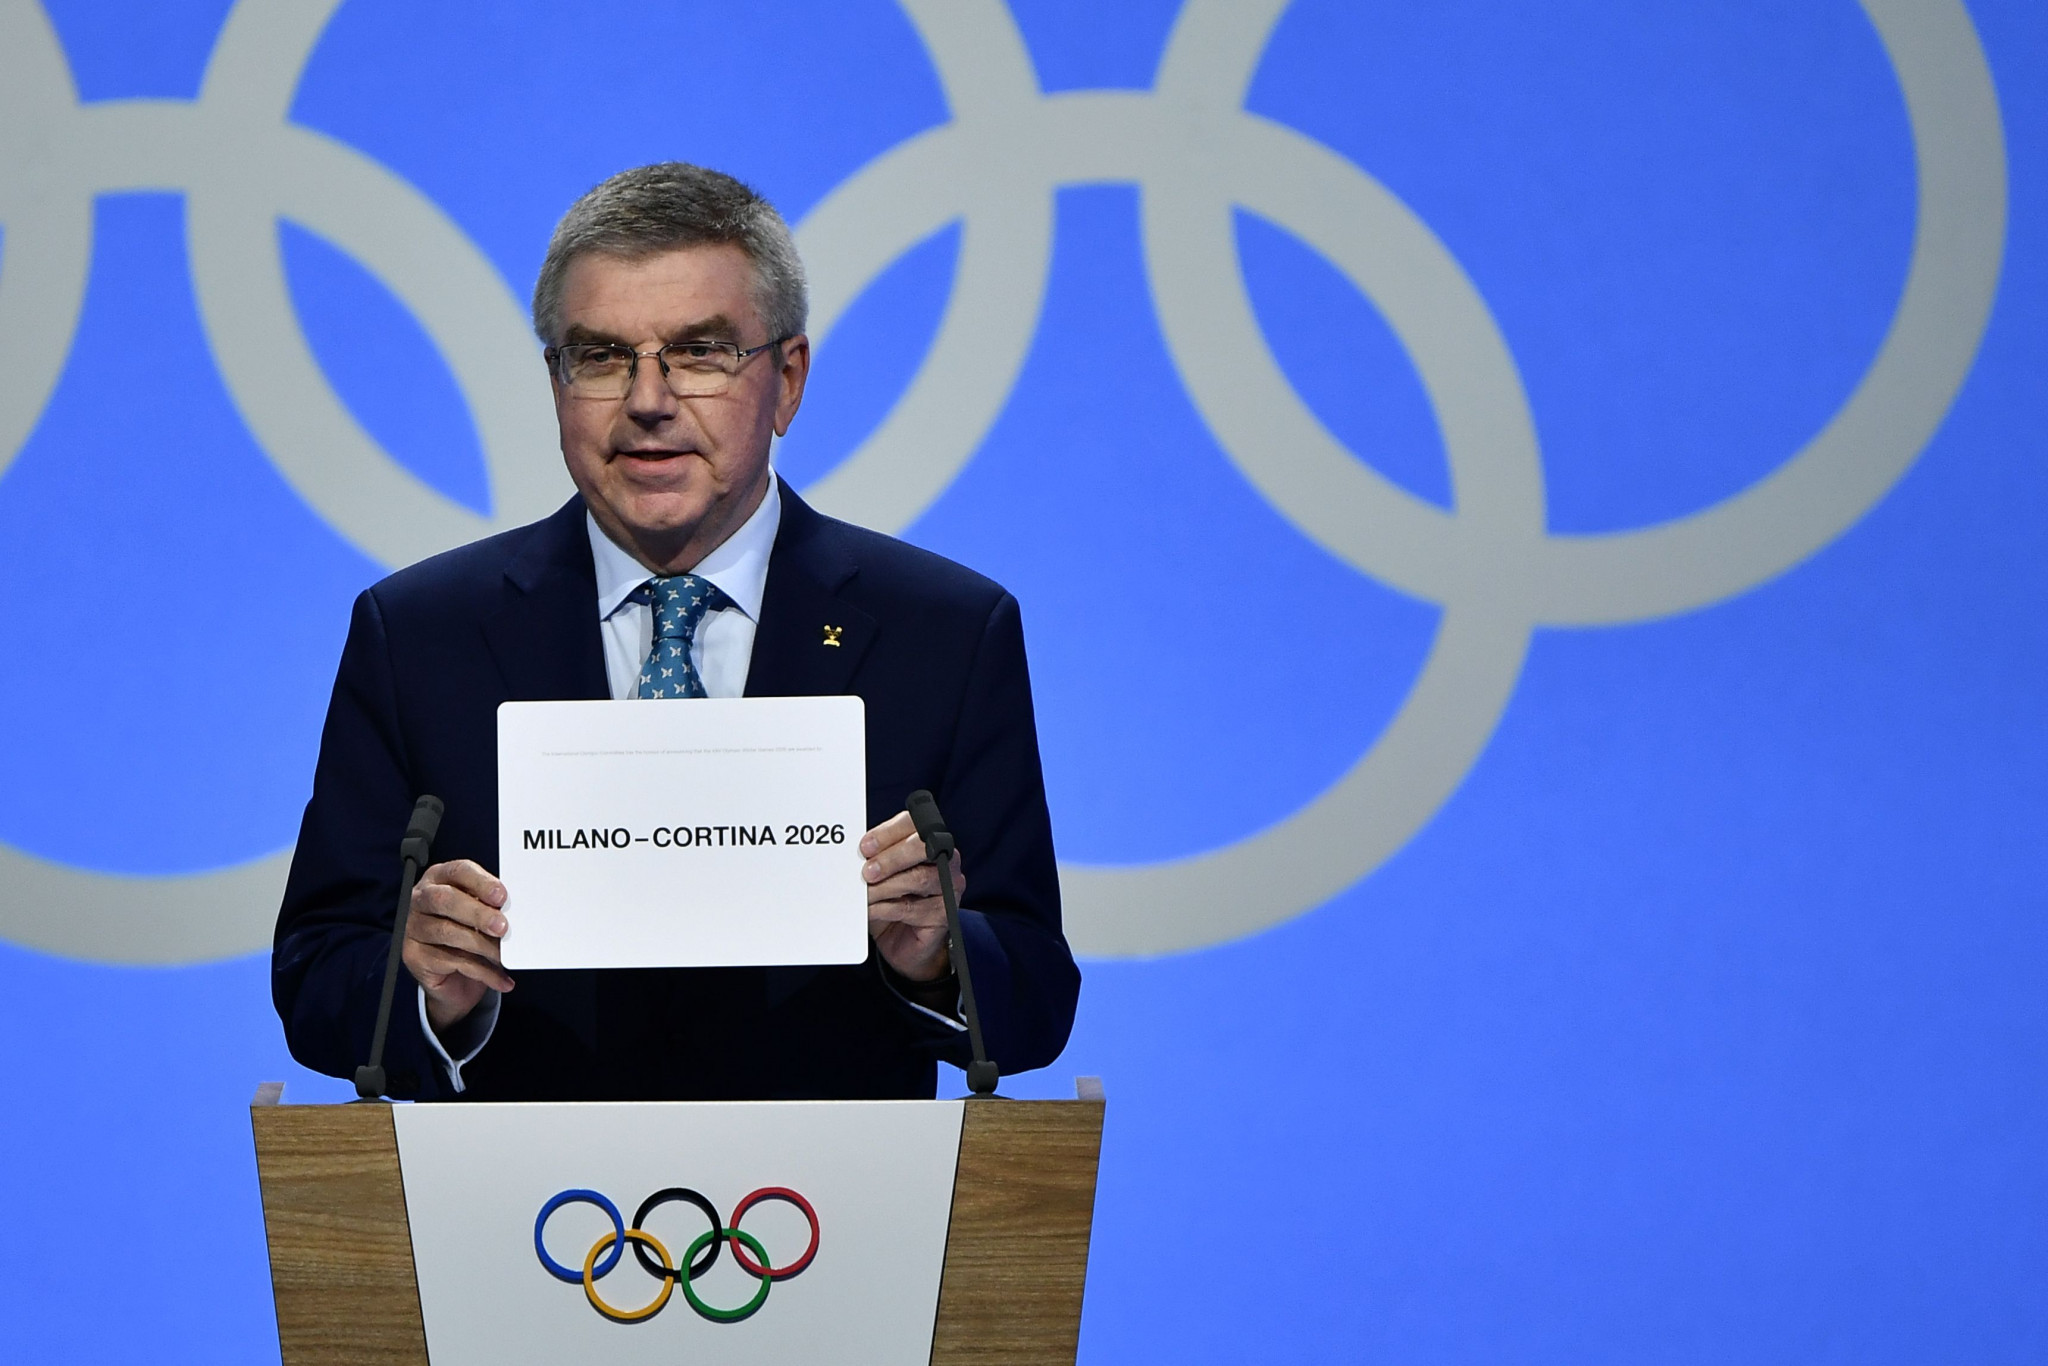 Italians win vote to host 2026 Winter Olympic and Paralympic Games 